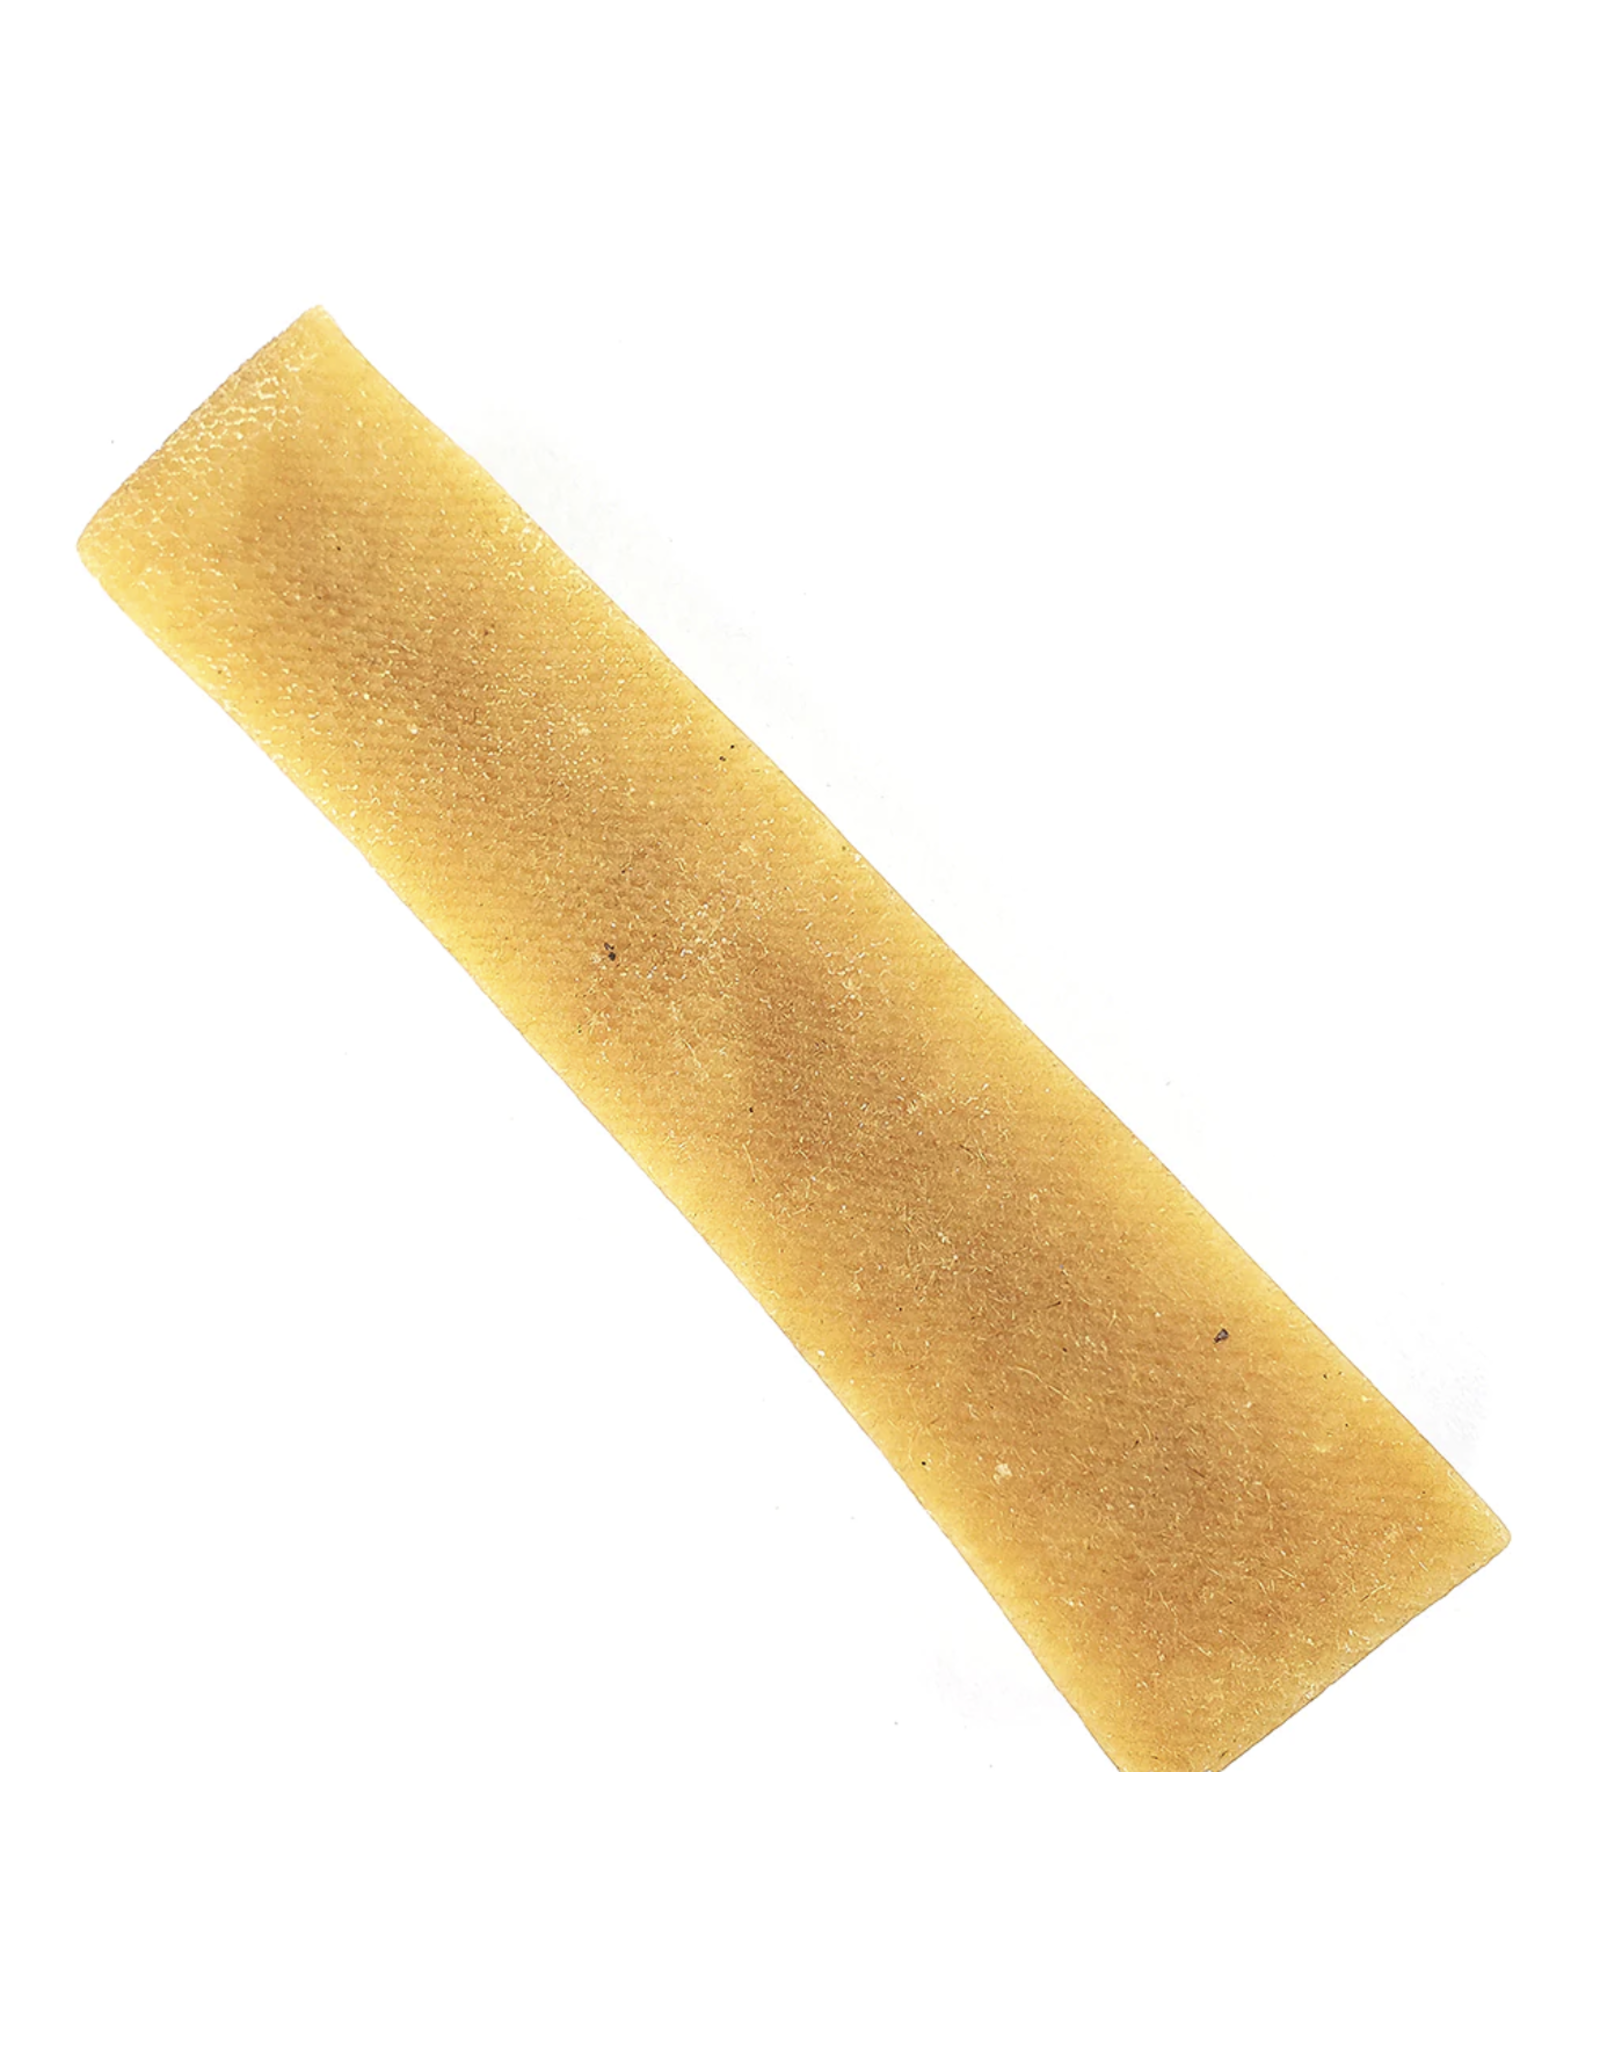 NATURAL DOG CO. NATURAL DOG CO. YAK CHEESE CHEW XLG